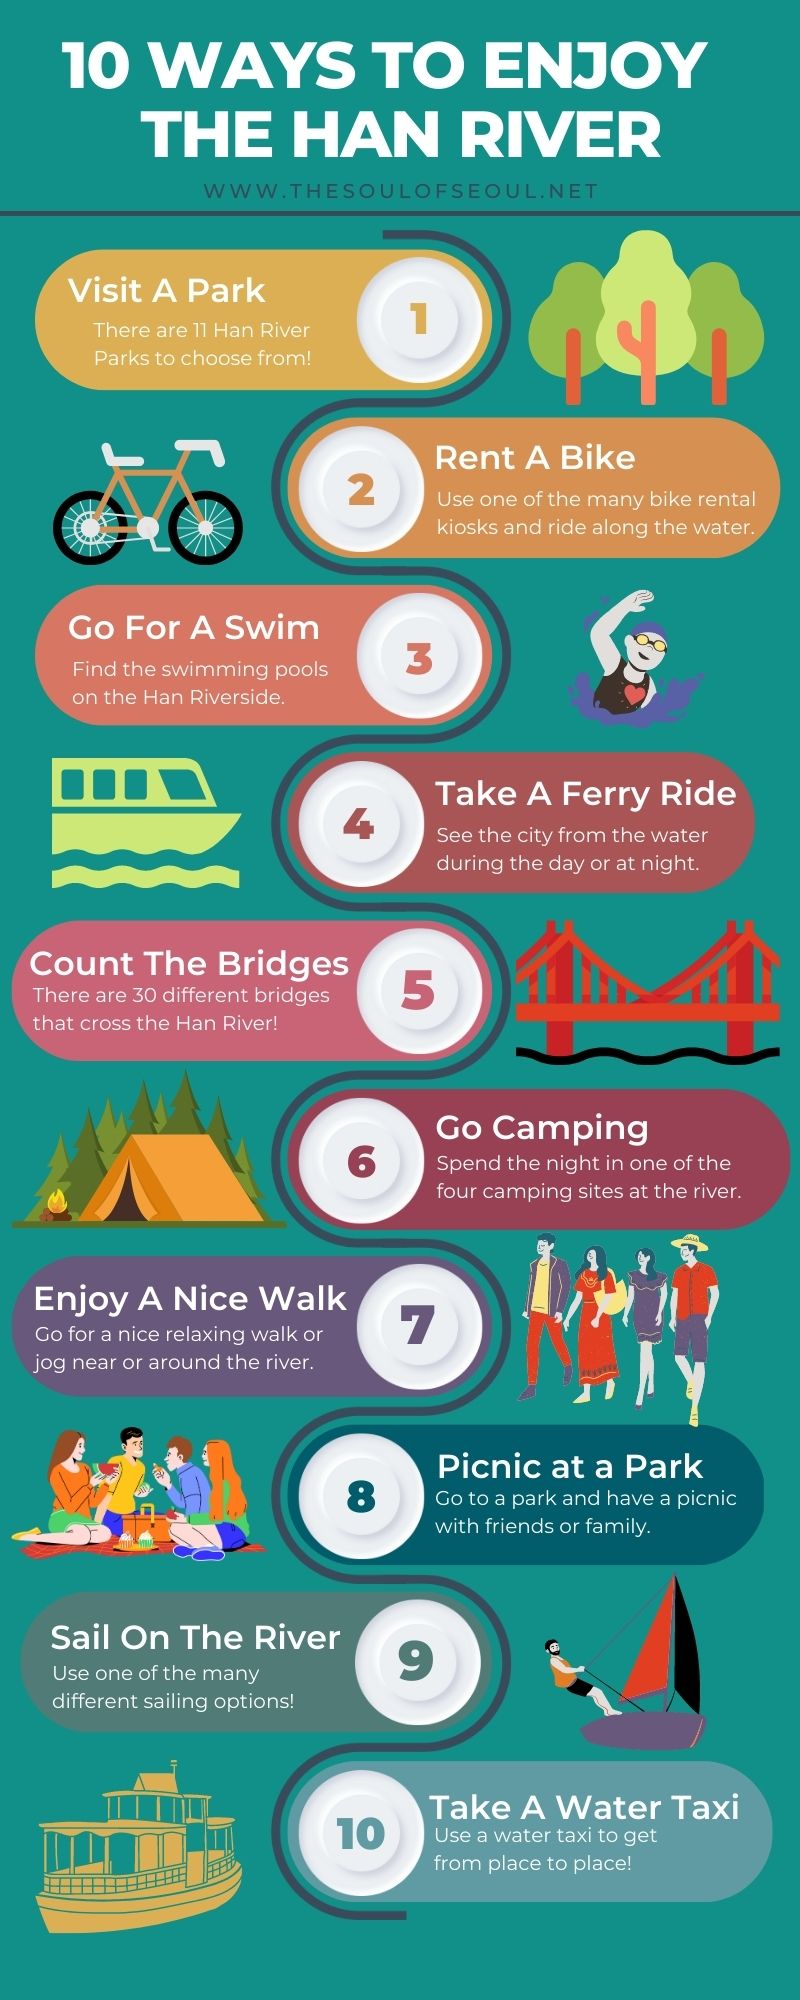 10 Ways to Enjoy The Han River: A helpful infographic with 10 things you can do at the Han River in Seoul, Korea.